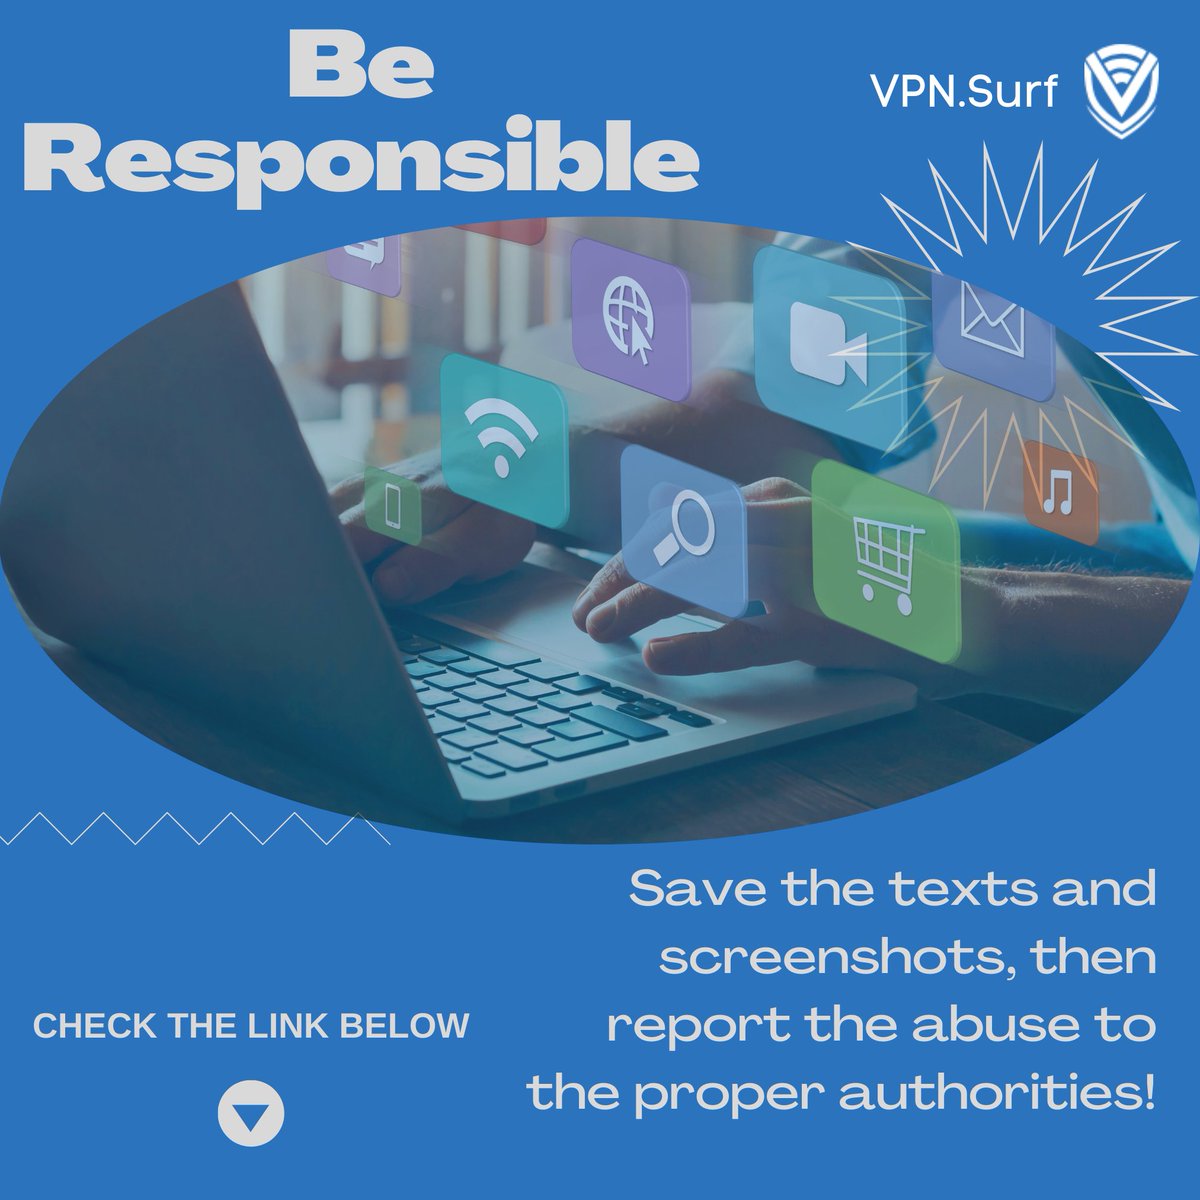 Cyberbullying is a severe problem that affects a large number of people online. Remember that bullies thrive on attention, and responding to them only empowers them. Don't let them have complete control over your internet experience.
#onlinefreedom #vpnsurf